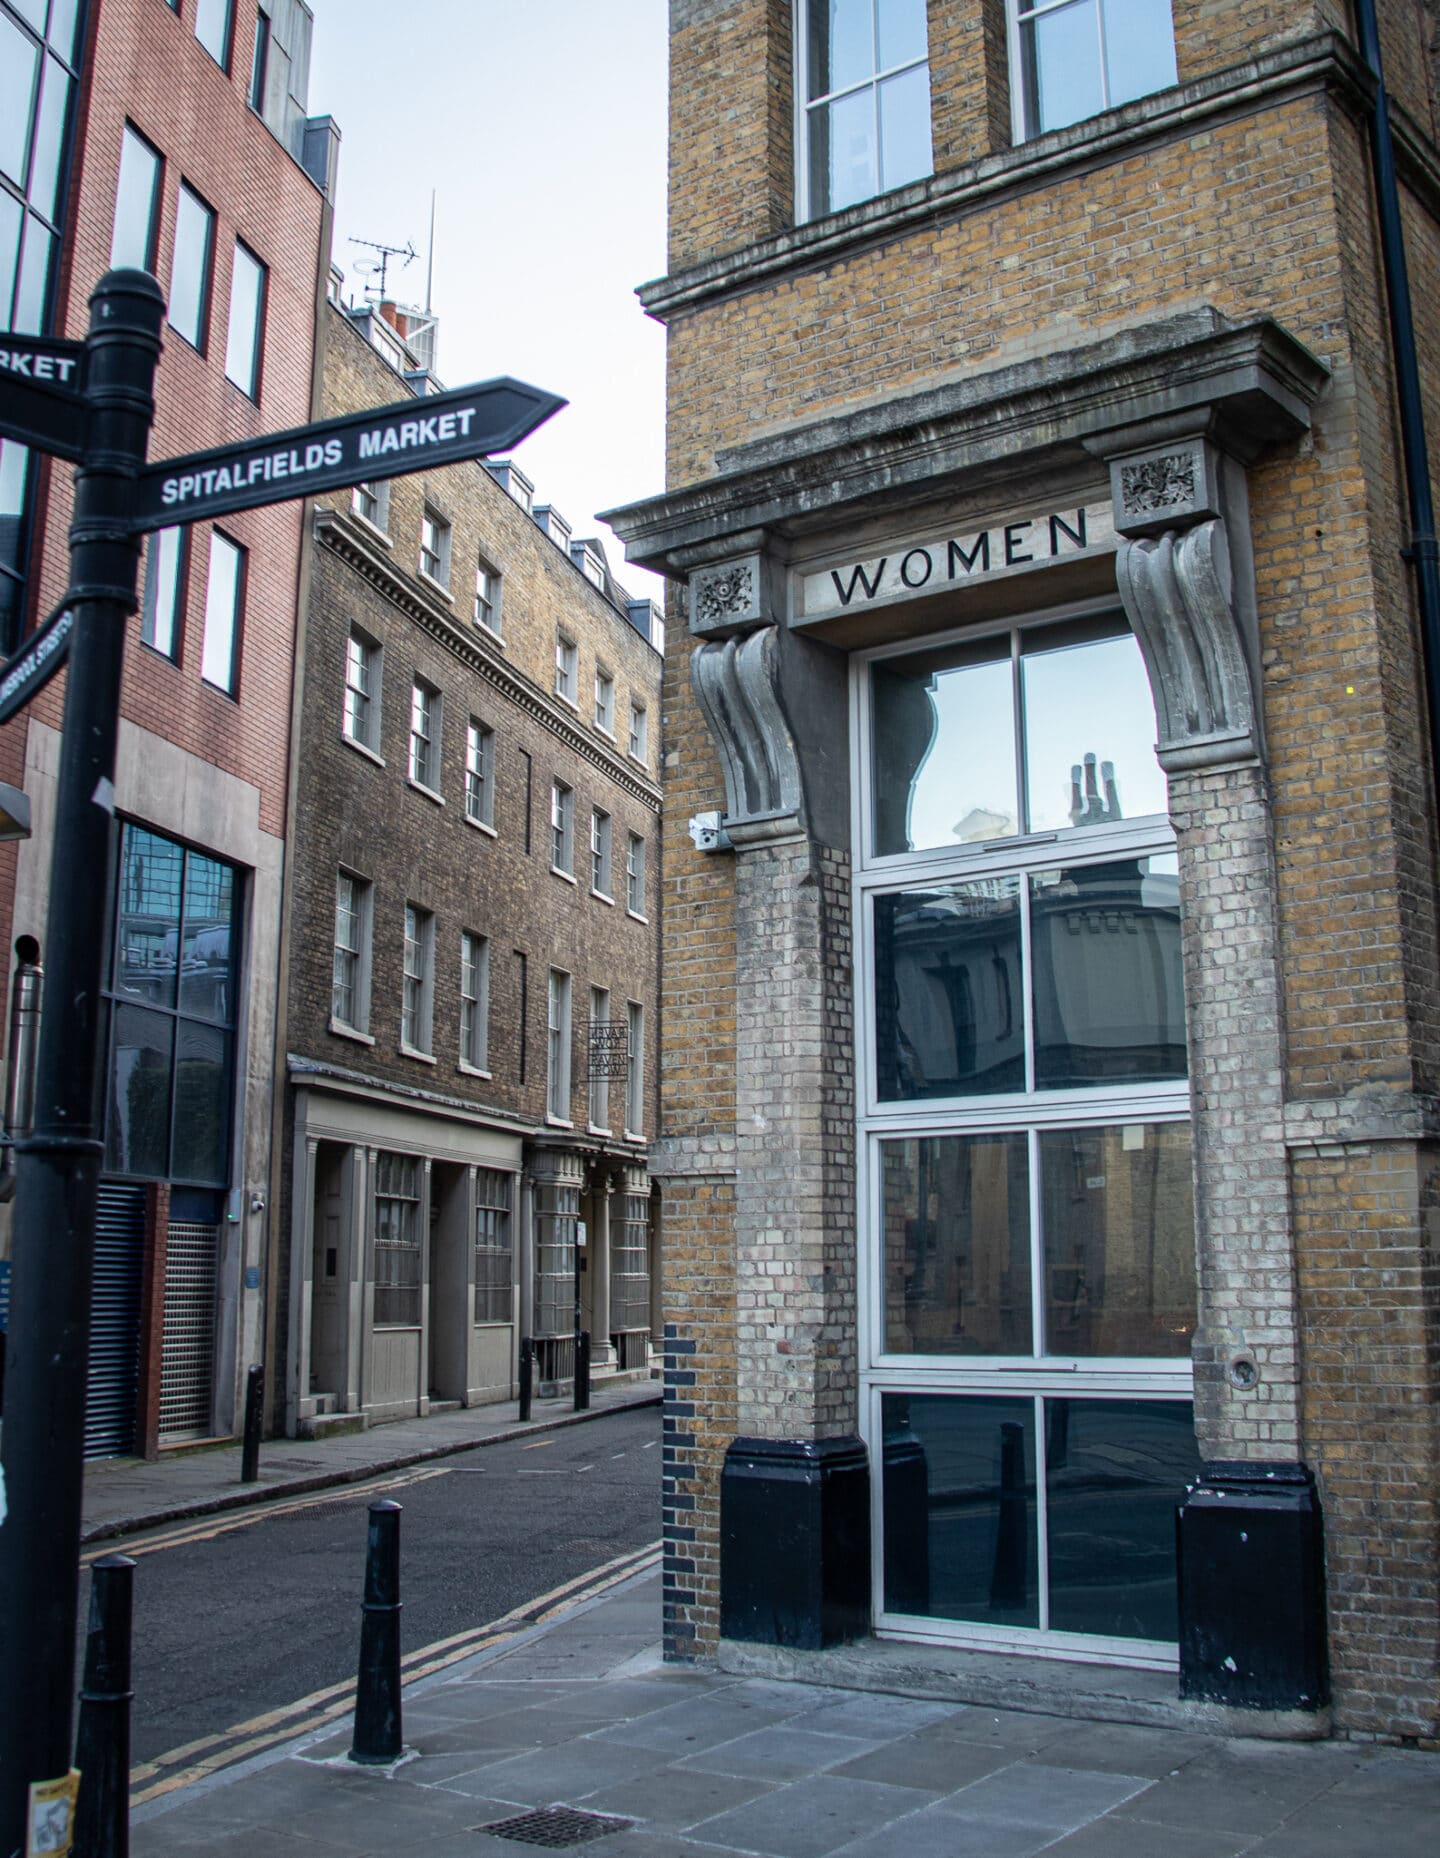 There's a converted workhouse on Crispin Lane near Spitalfields market. Today it is student accommodation. The signs for 'men' and 'women ' above the doorways are the only indication of the building's past. It's believed that Mary Jane Kelly, the final victim of Jack The Ripper, stayed here before her death.